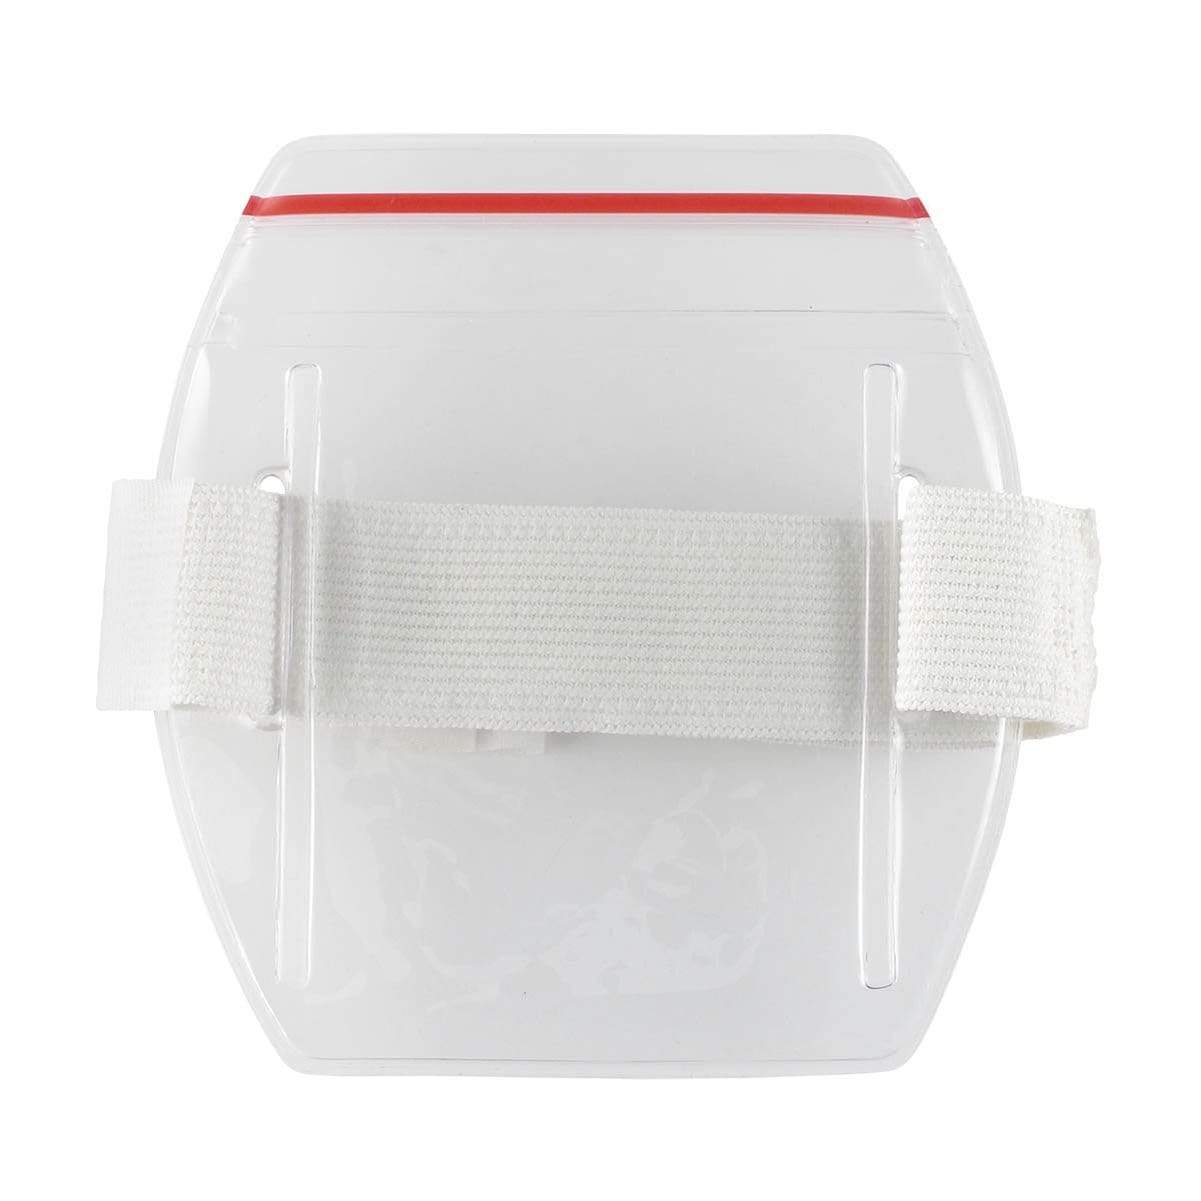 White Vertical Armband ID Badge Holders with Zipper Top (504-ARZB & 504-ARZW) 504-ARZW